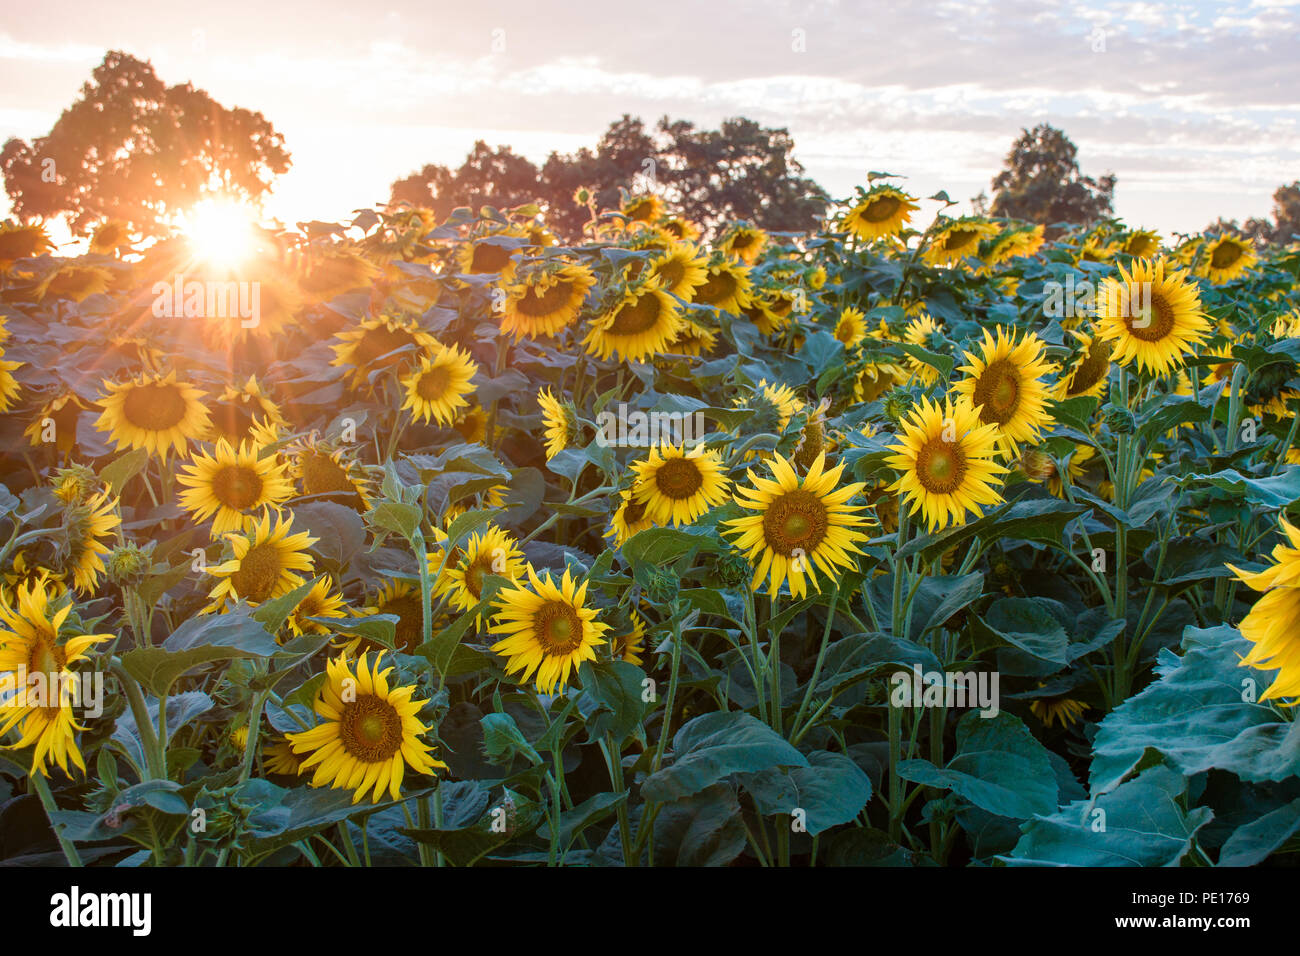 A sunburst is caught over a field of sunflowers outside of Woodland, California during a warm mid-summer evening. Stock Photo